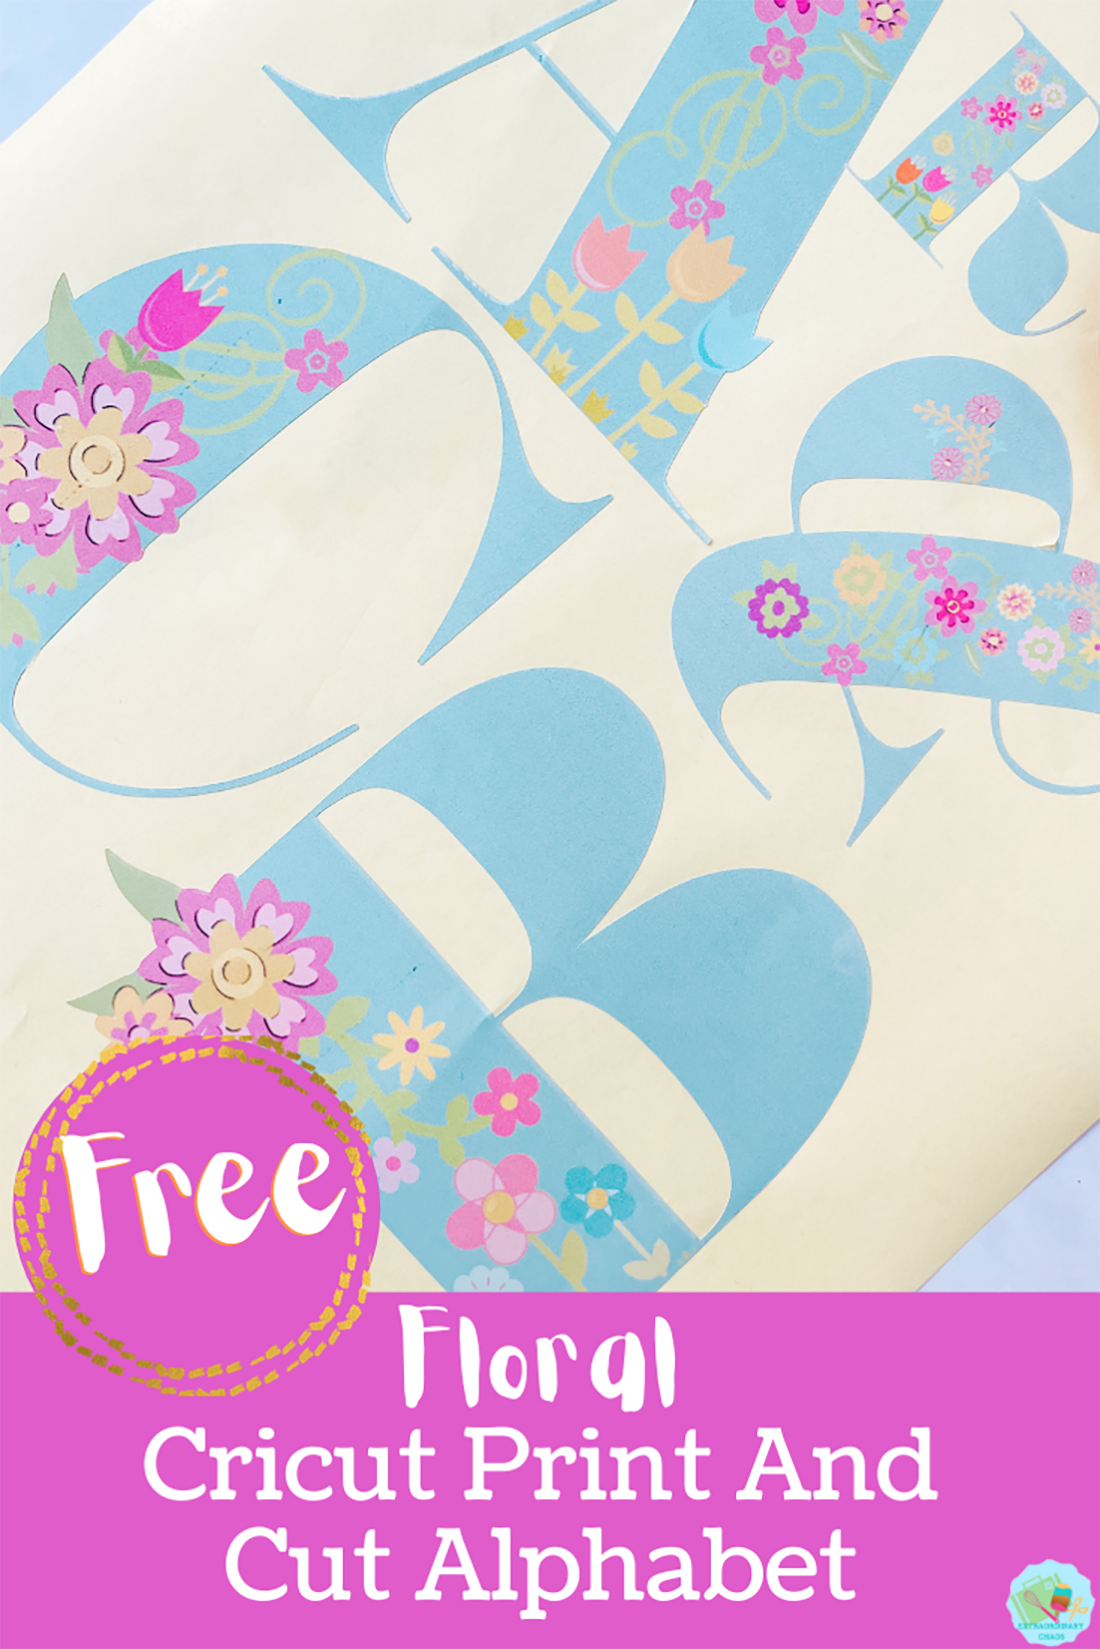 Free downloadable Floral print and cut Alphabet and Numbers for crafting with kids, planners, home decor and bullet journals